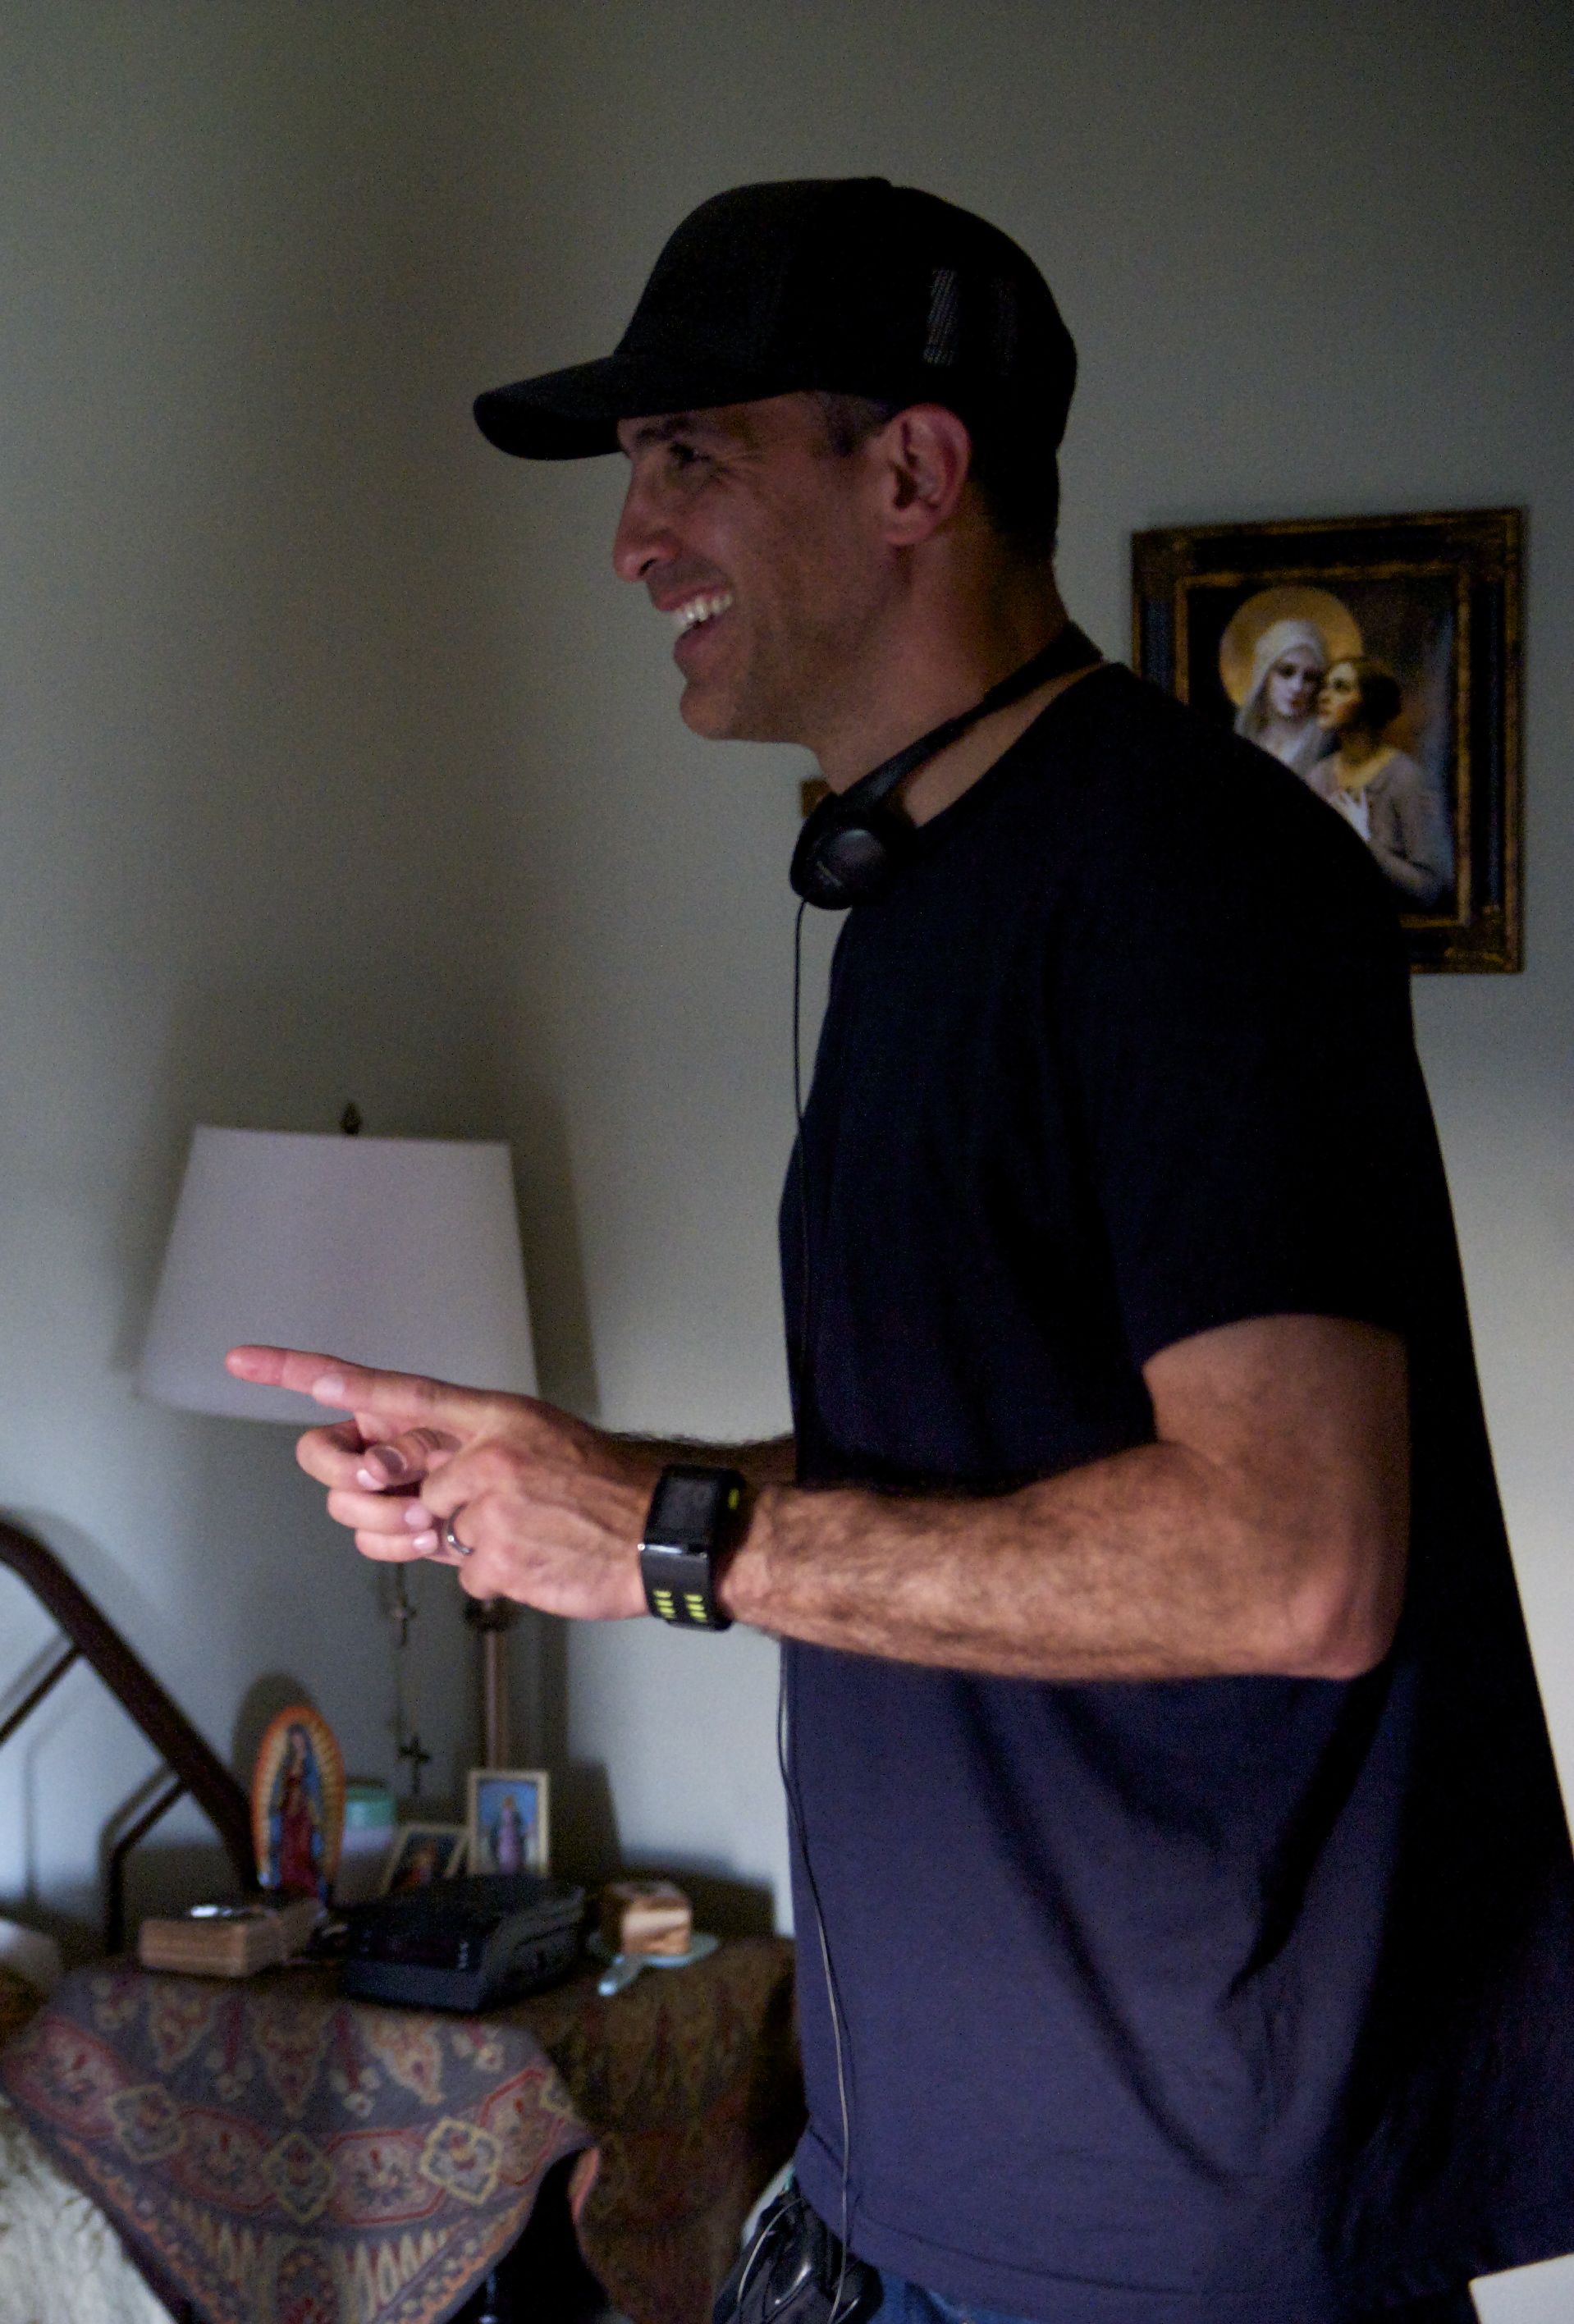 Neal Edelstein directing on the set of Haunting Melissa.